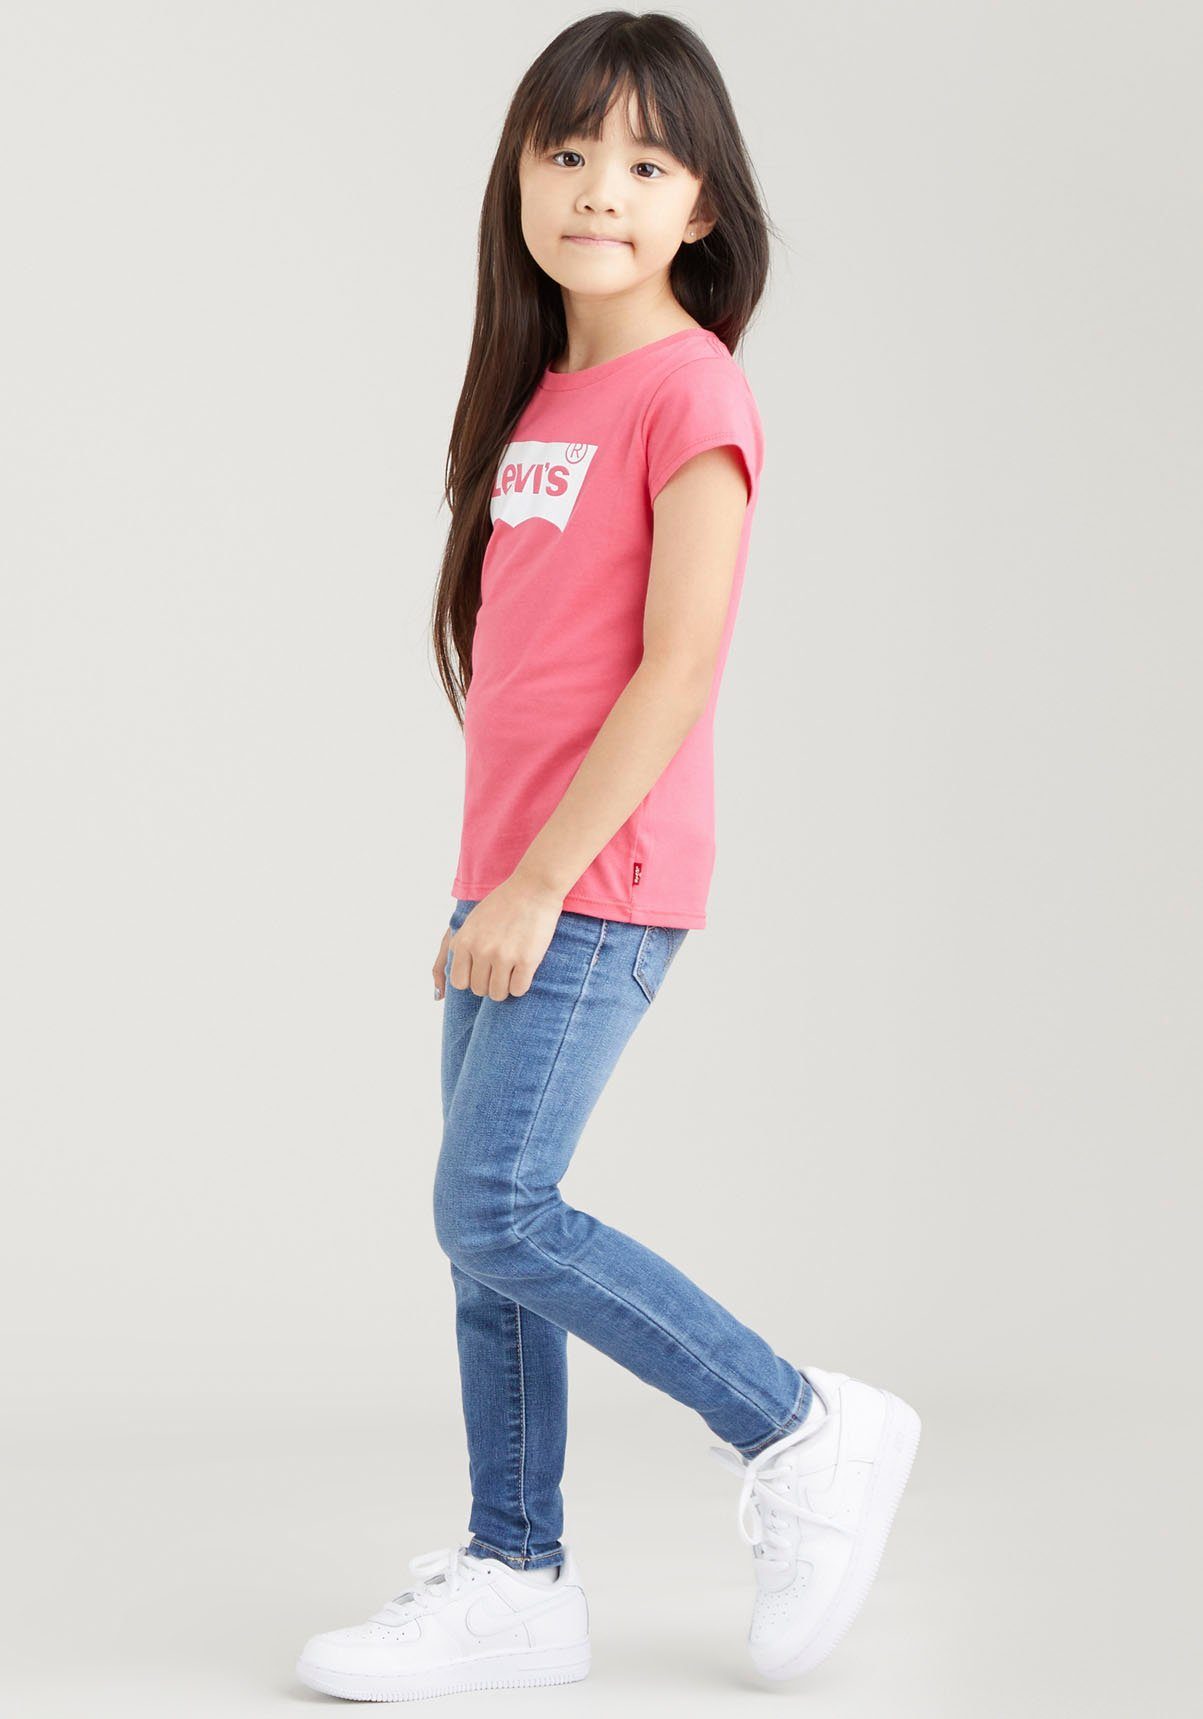 Kids SKINNY Stretch-Jeans used for blue 720™ mid GIRLS RISE SUPER Levi's® HIGH